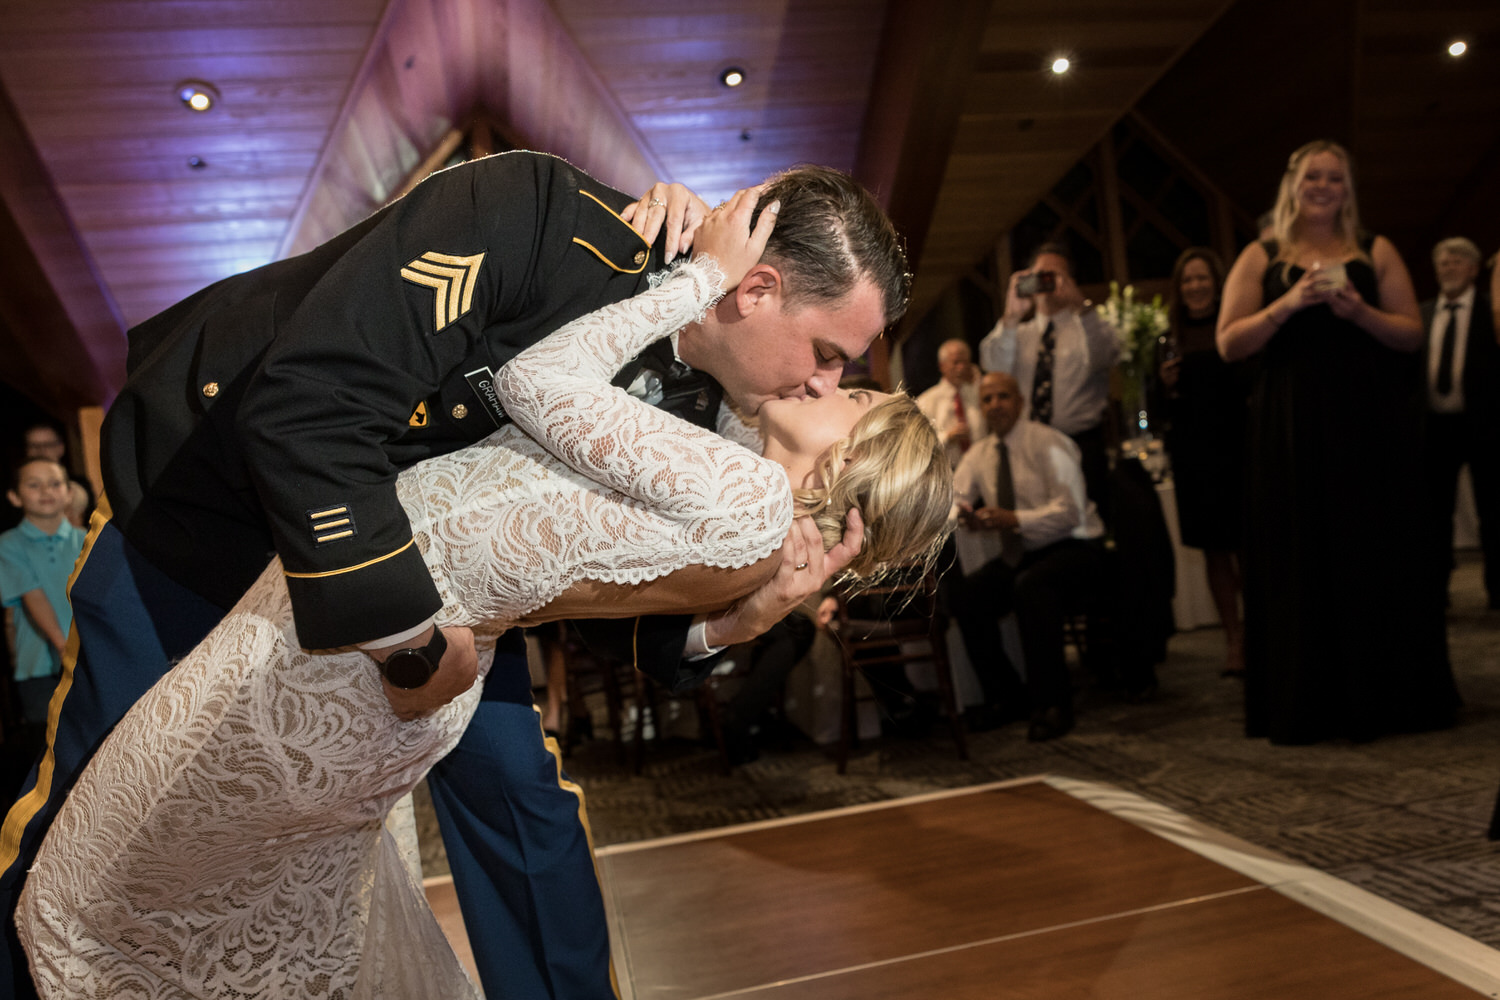 A romantic dip and kiss for a bride  and groom on the dance floor at a North Room wedding reception.